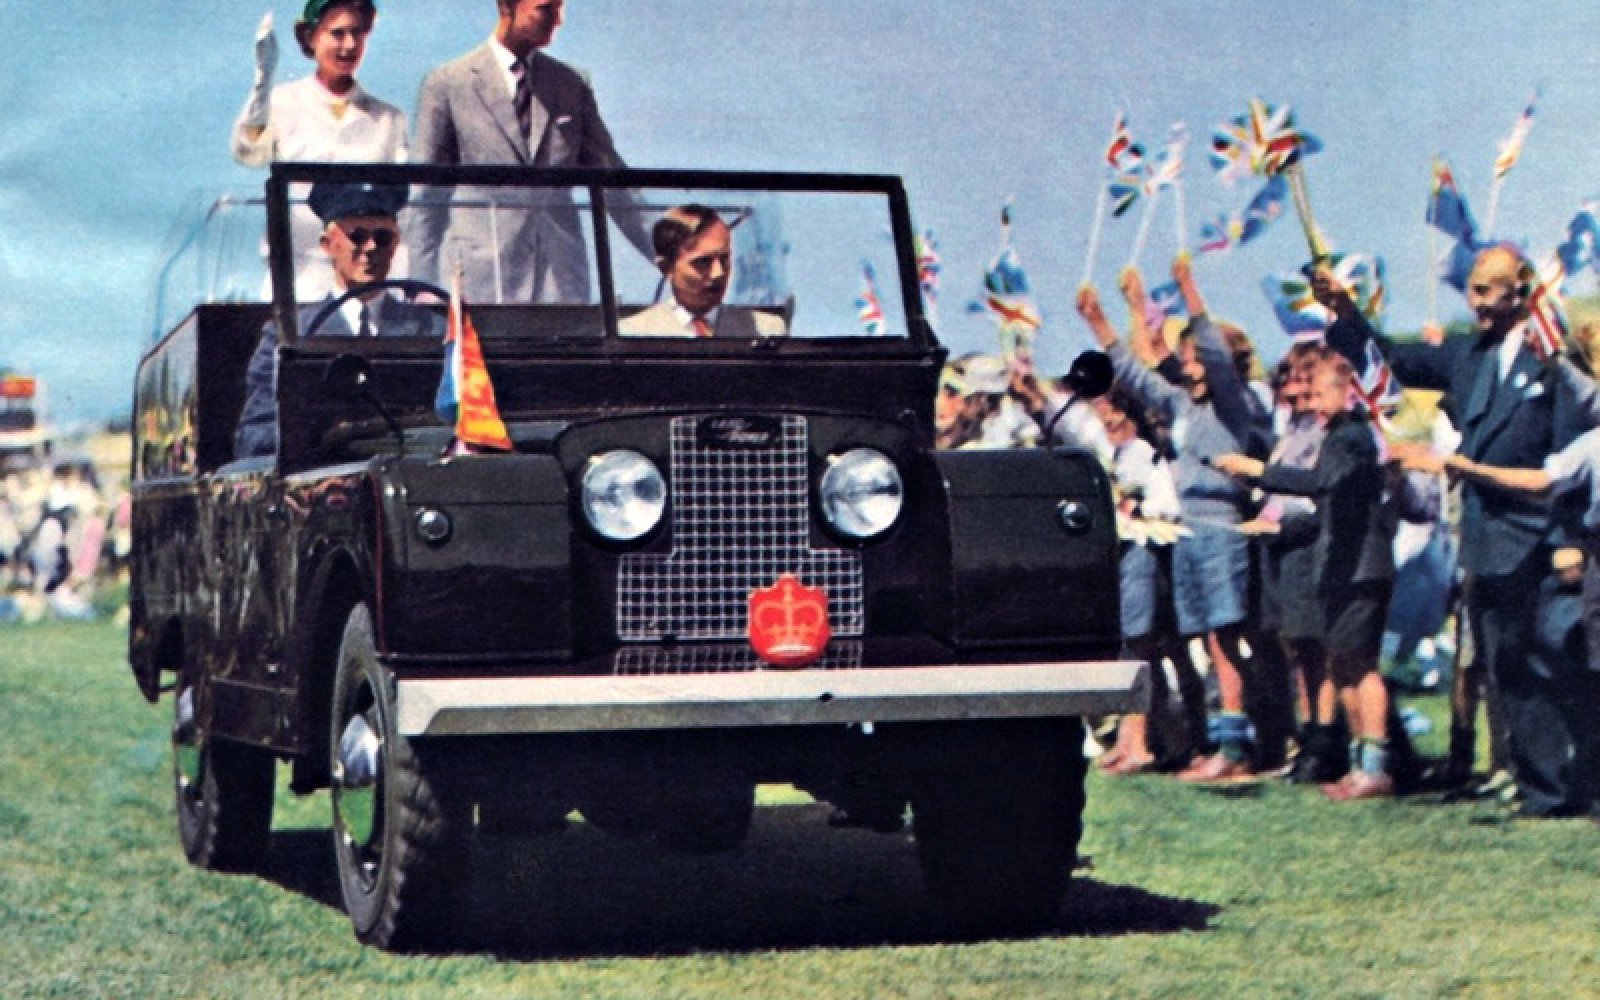 Land Rover Defender Facts - Did you know that the first Land Rover was intended as a tractor?